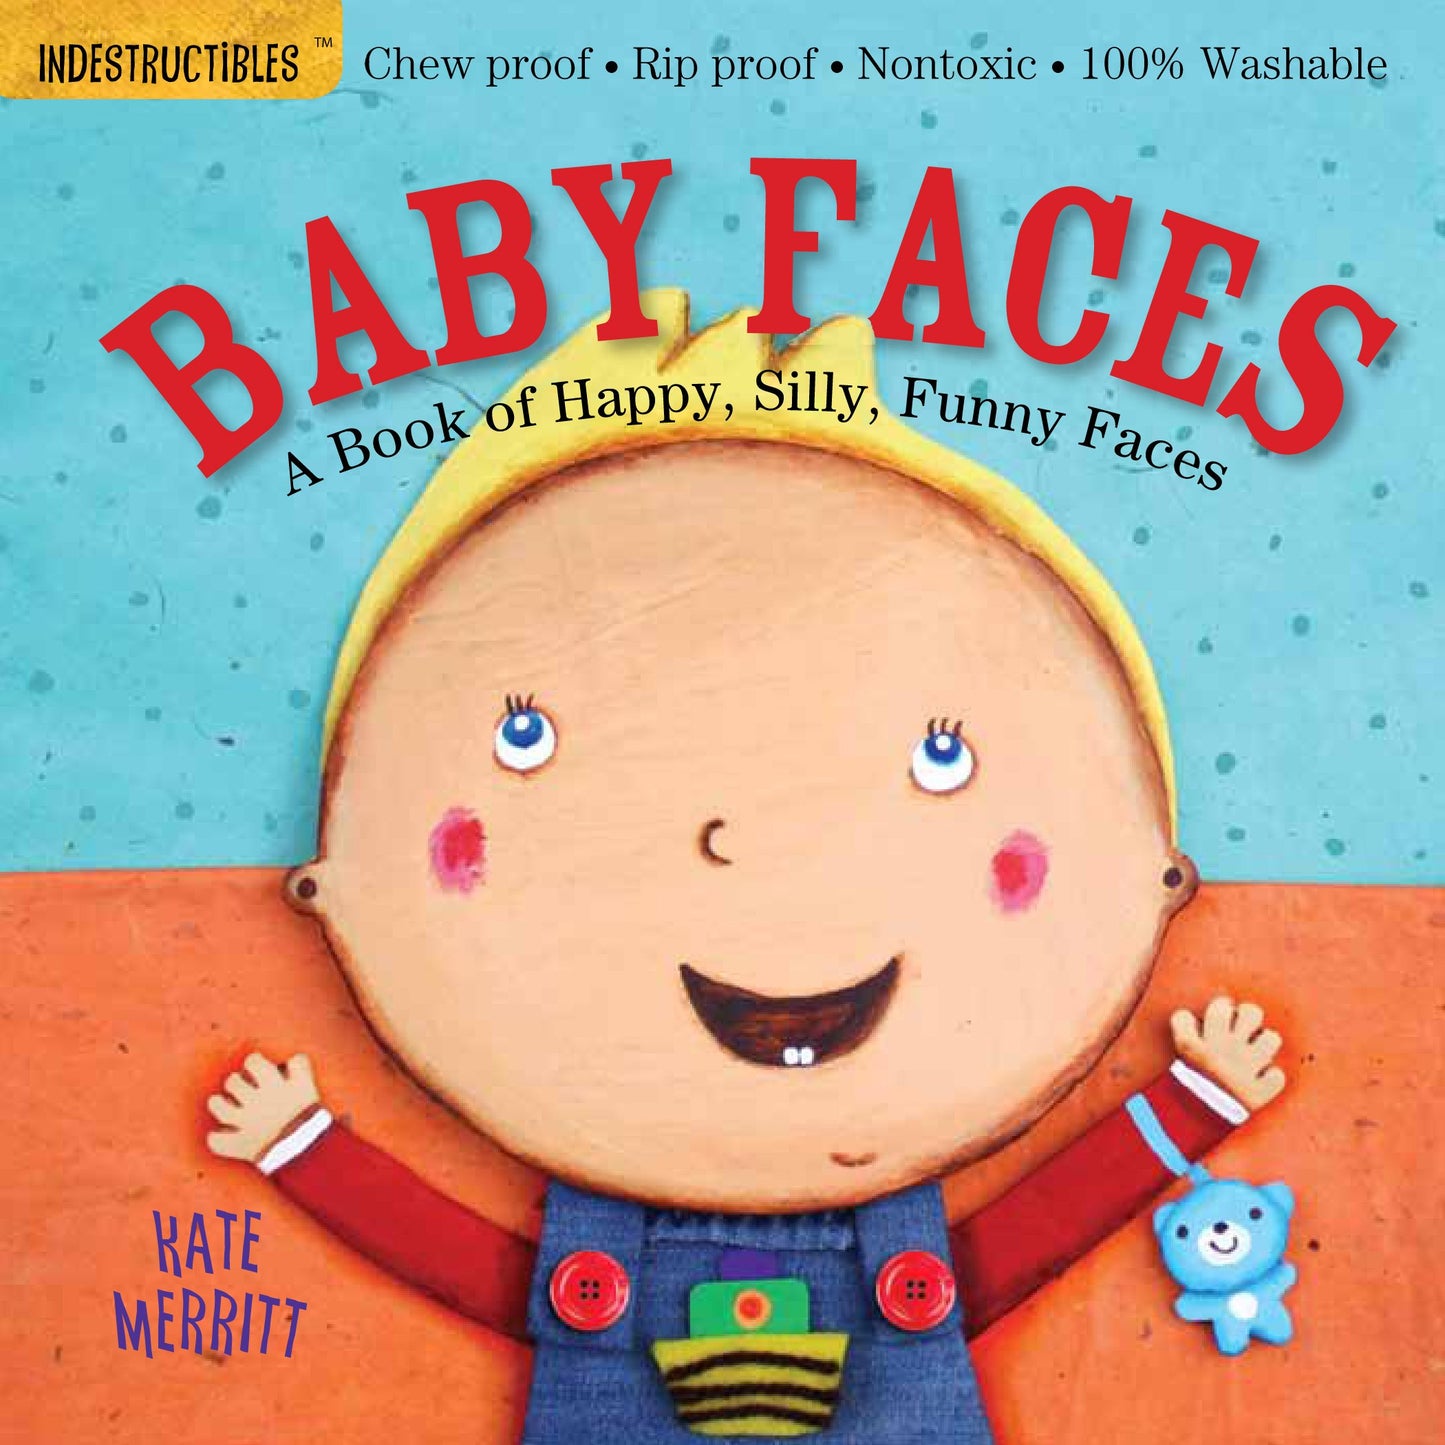 front cover of book with illustration of a baby smiling, title, and author's name